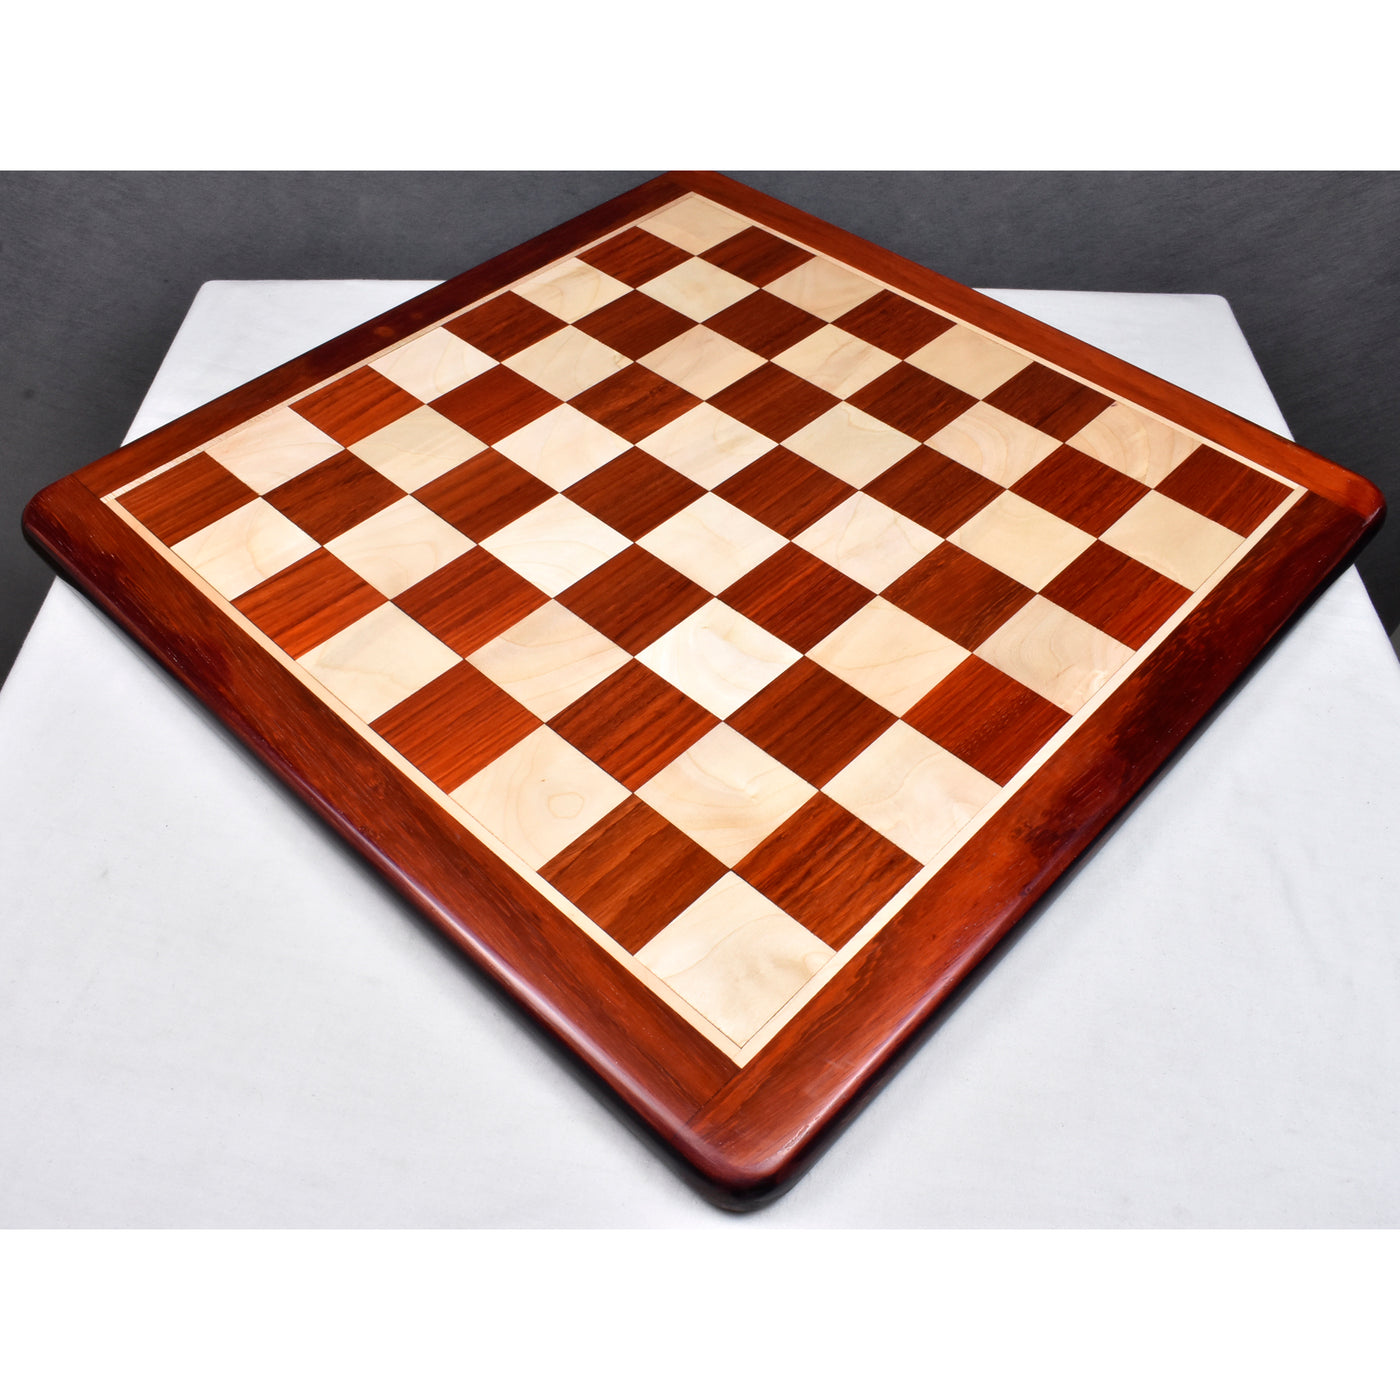 Bud Rosewood & Maple Wood Chess board with 55 mm Wooden Square -  Chess Set Handmade